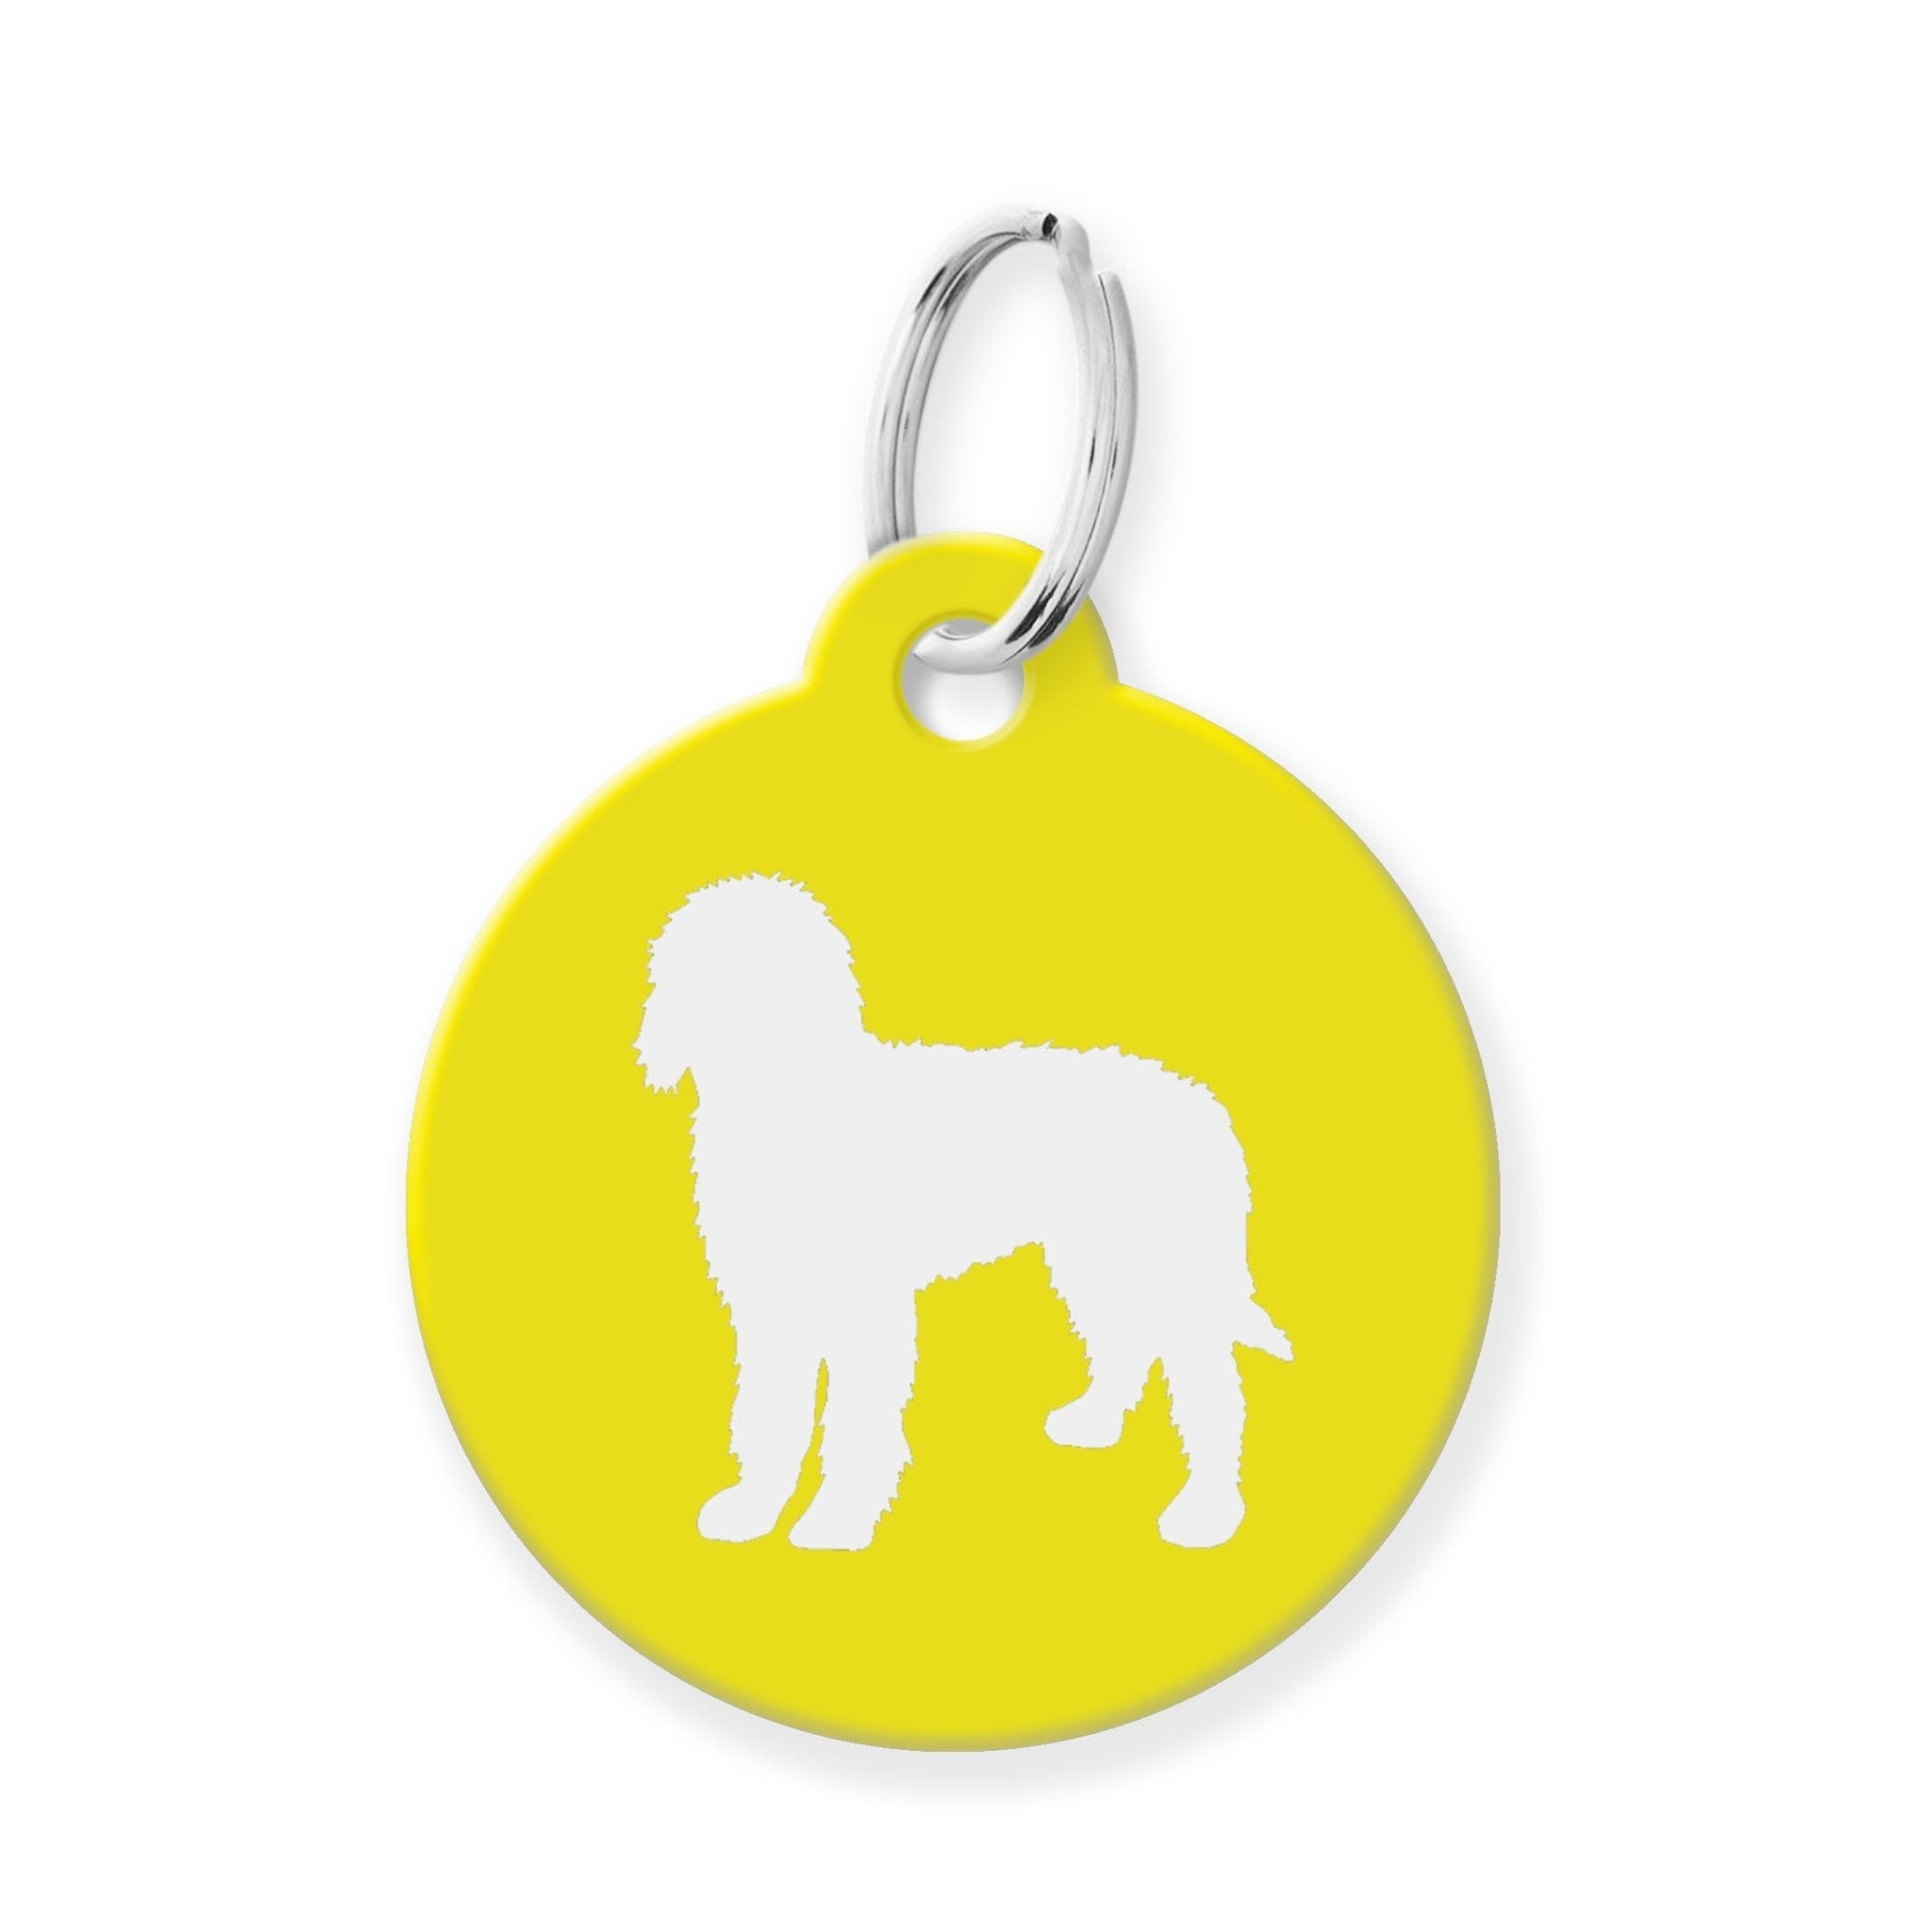 Goldendoodle Silhouette Pet Tag - The Barking Mutt